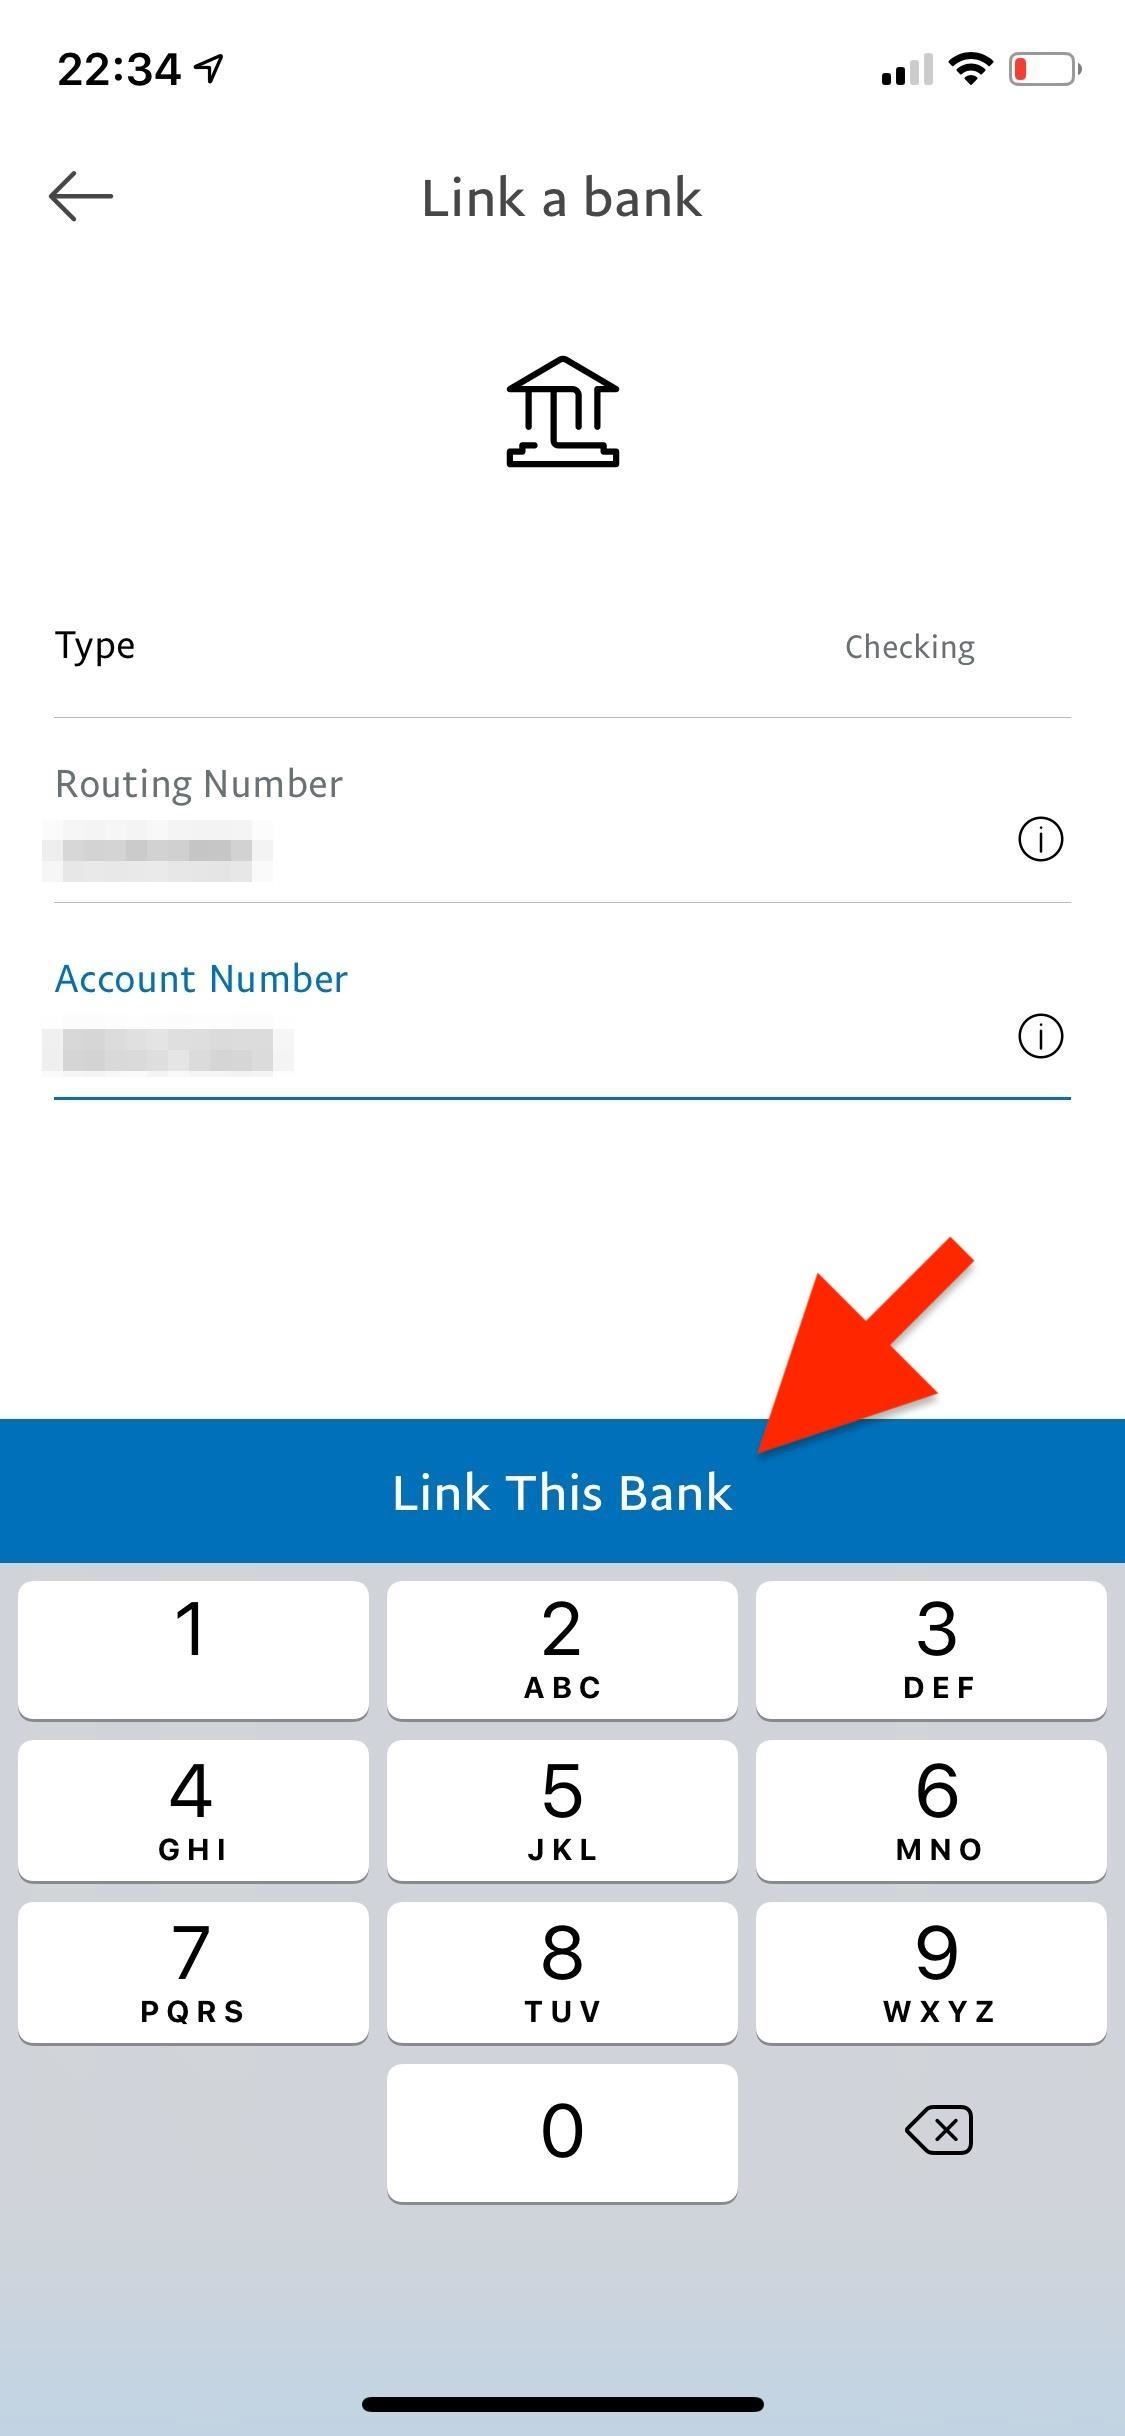 How to Add a Bank Account, Debit Card, or Credit Card to Your PayPal